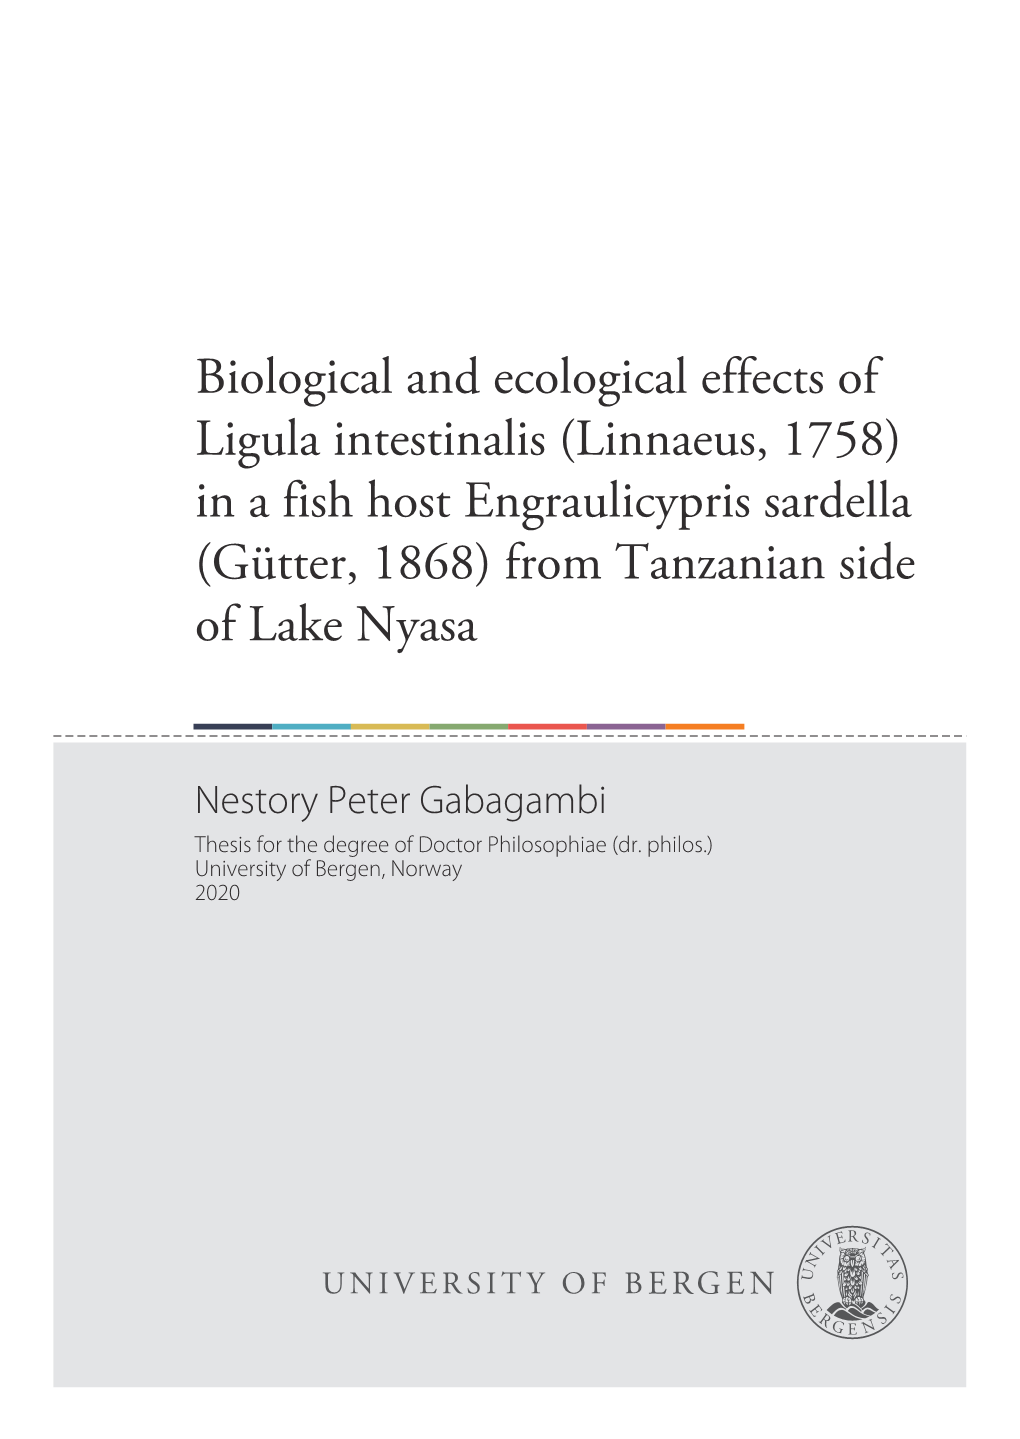 Biological and Ecological Effects of Ligula Intestinalis (Linnaeus, 1758) in a Fish Host Engraulicypris Sardella (Gütter, 1868) from Tanzanian Side of Lake Nyasa